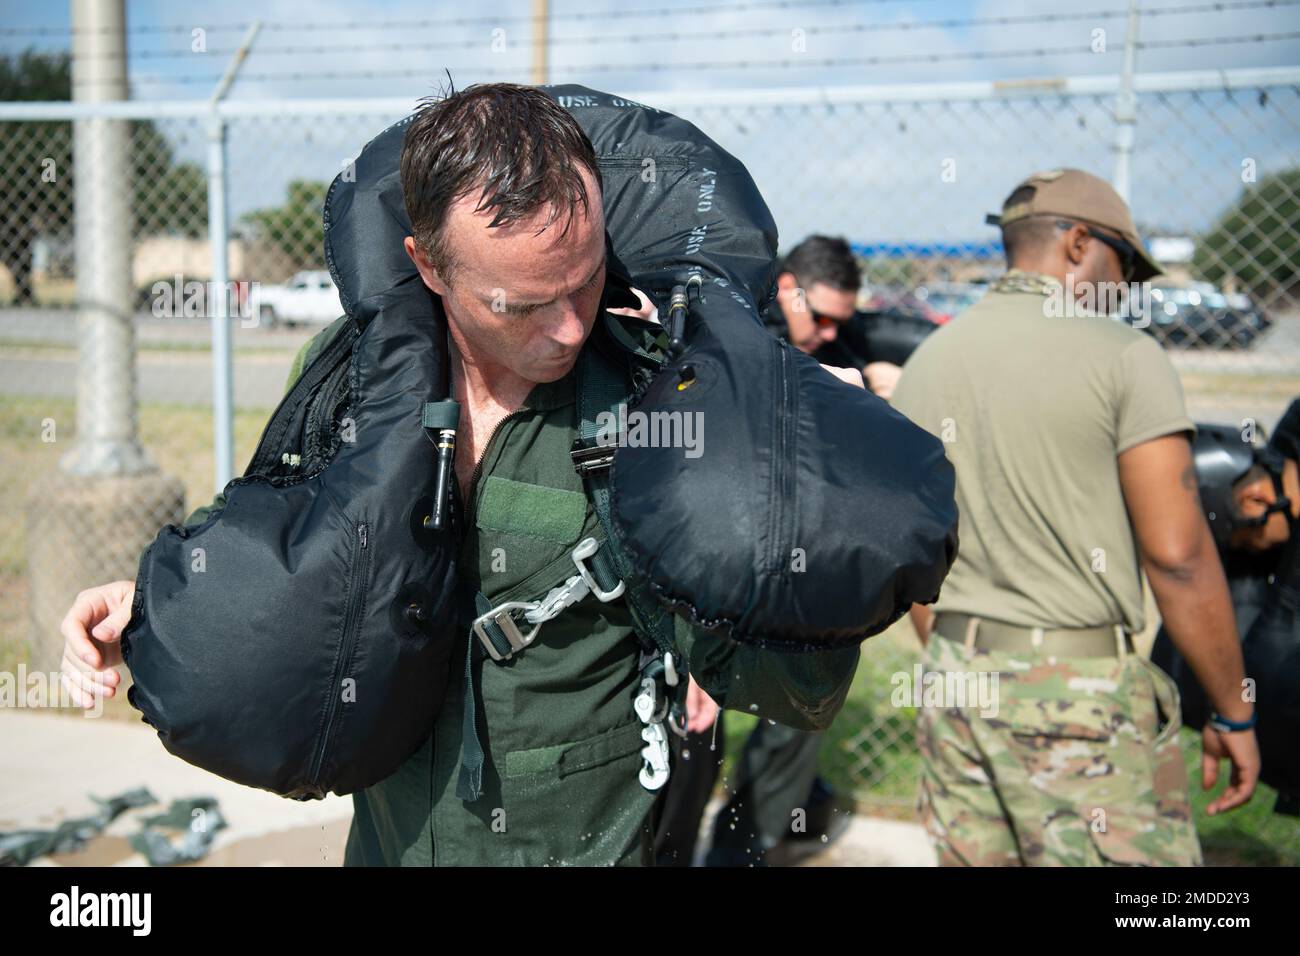 An F-16 instructor pilot from the 149th Fighter Wing, practices using survival equipment as part of water survival training at Joint Base San Antonio-Lackland, July 16, 2022. The pilots do this training every 36 months to remain confident in their abilities and their gear. Stock Photo